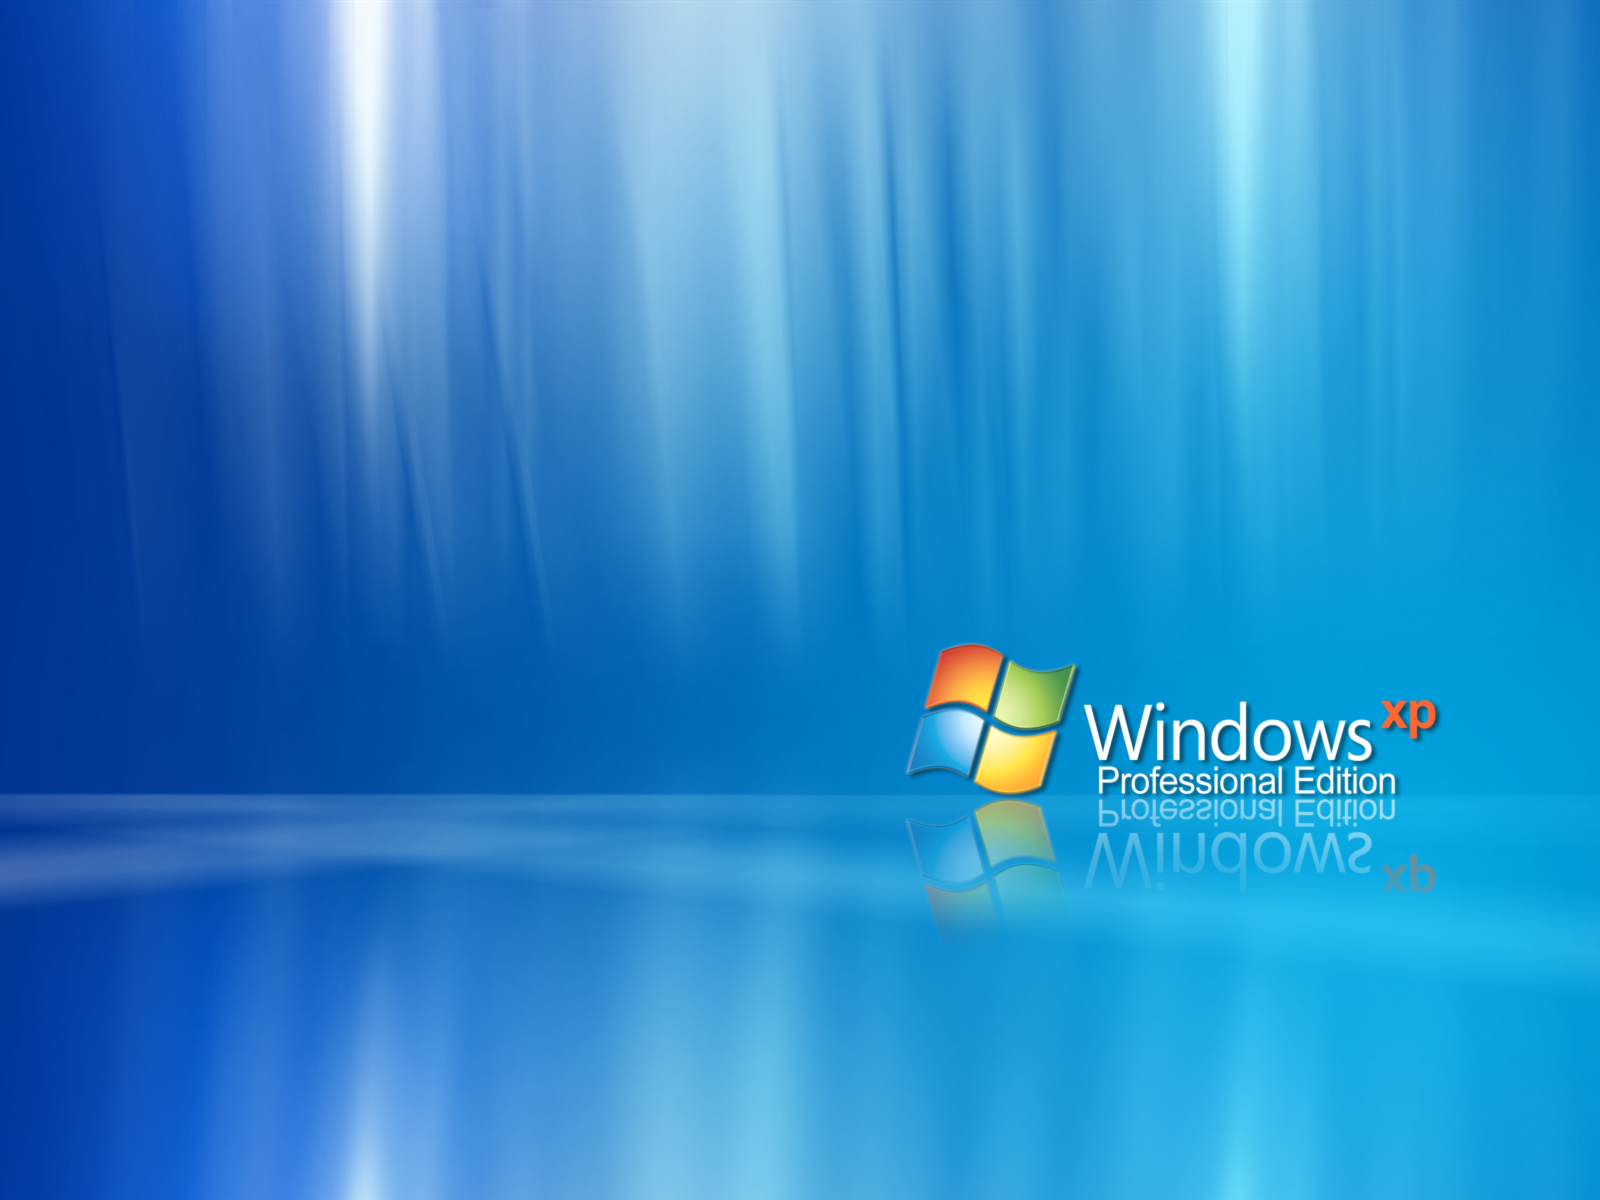 Windows XP Wallpapers - asimBaBa Free Software Free IDM Forever